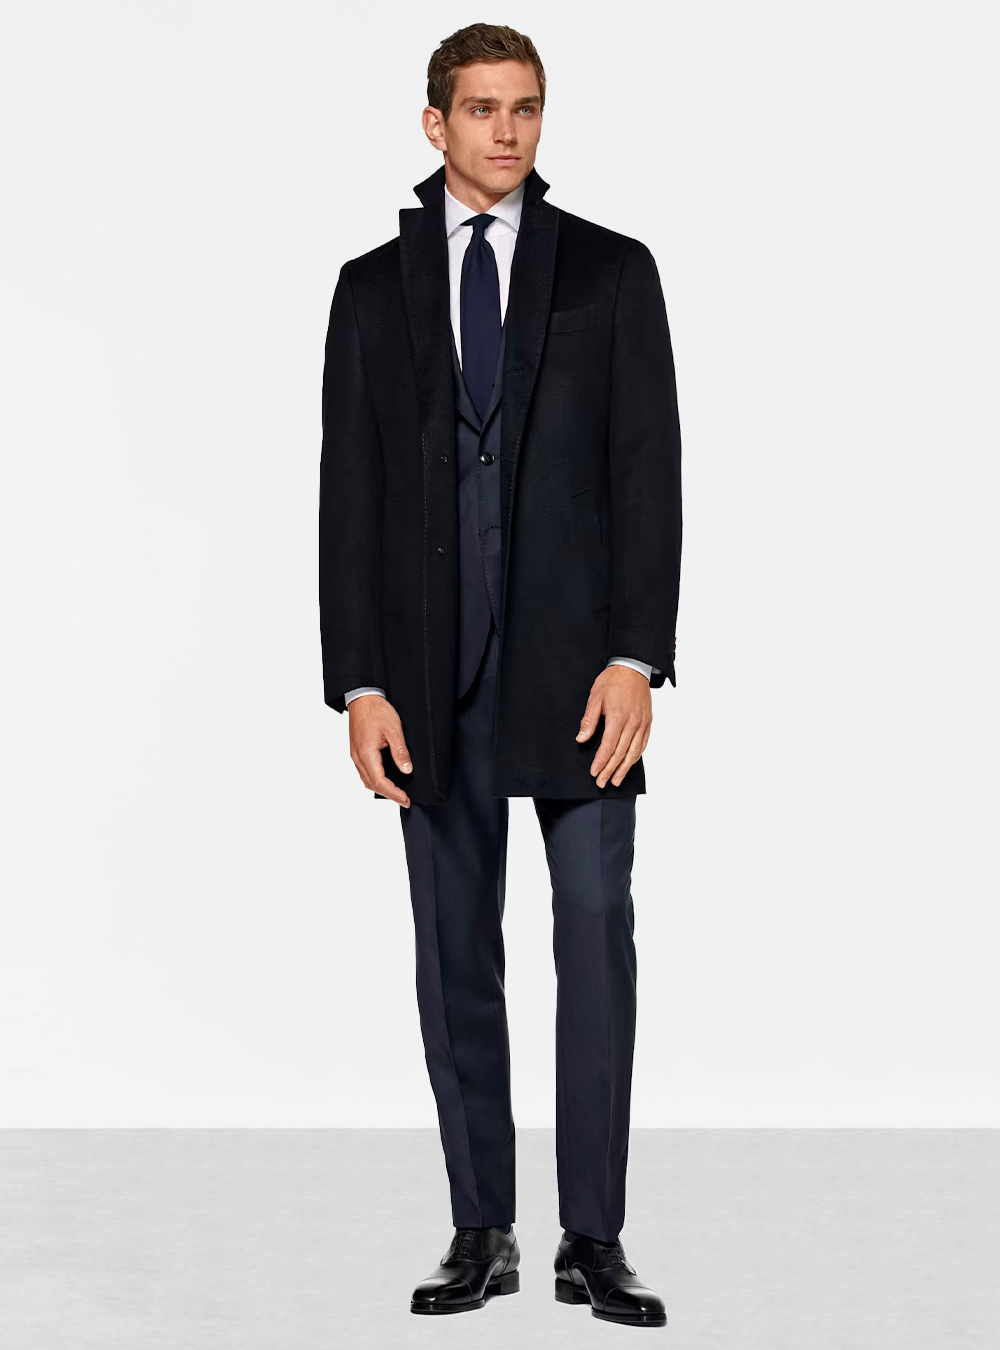 navy overcoat with a navy suit and white shirt